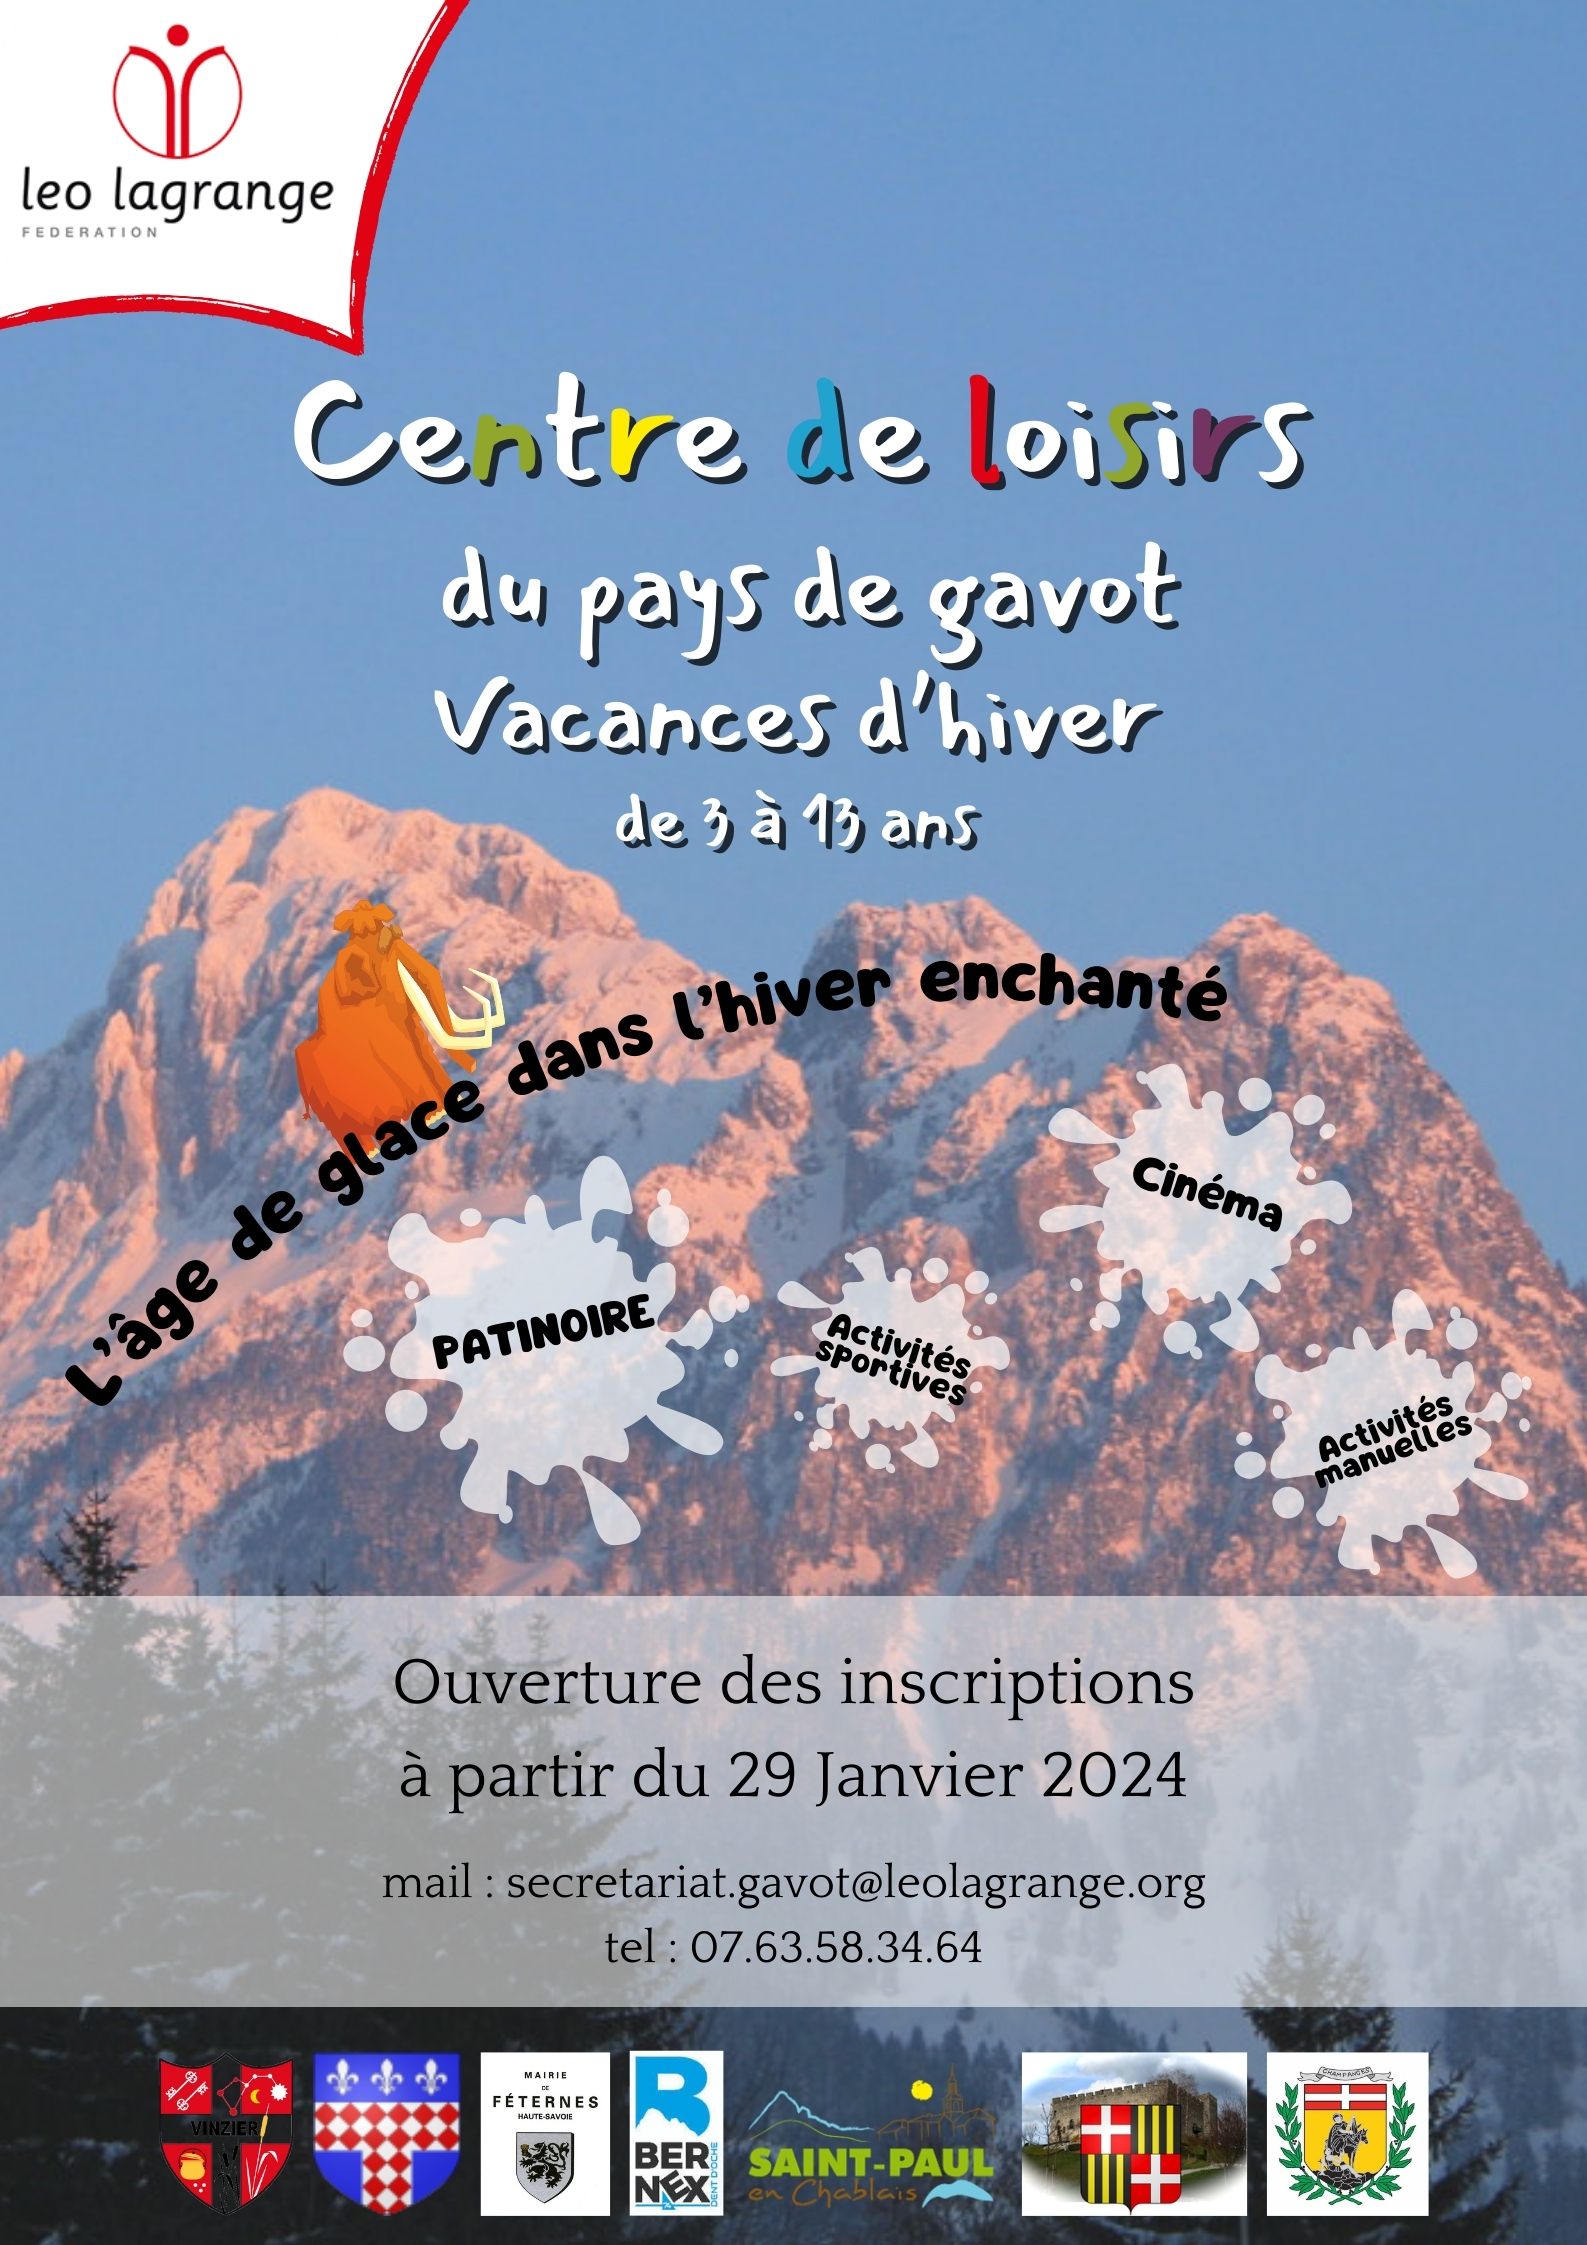 You are currently viewing Ouverture des inscriptions